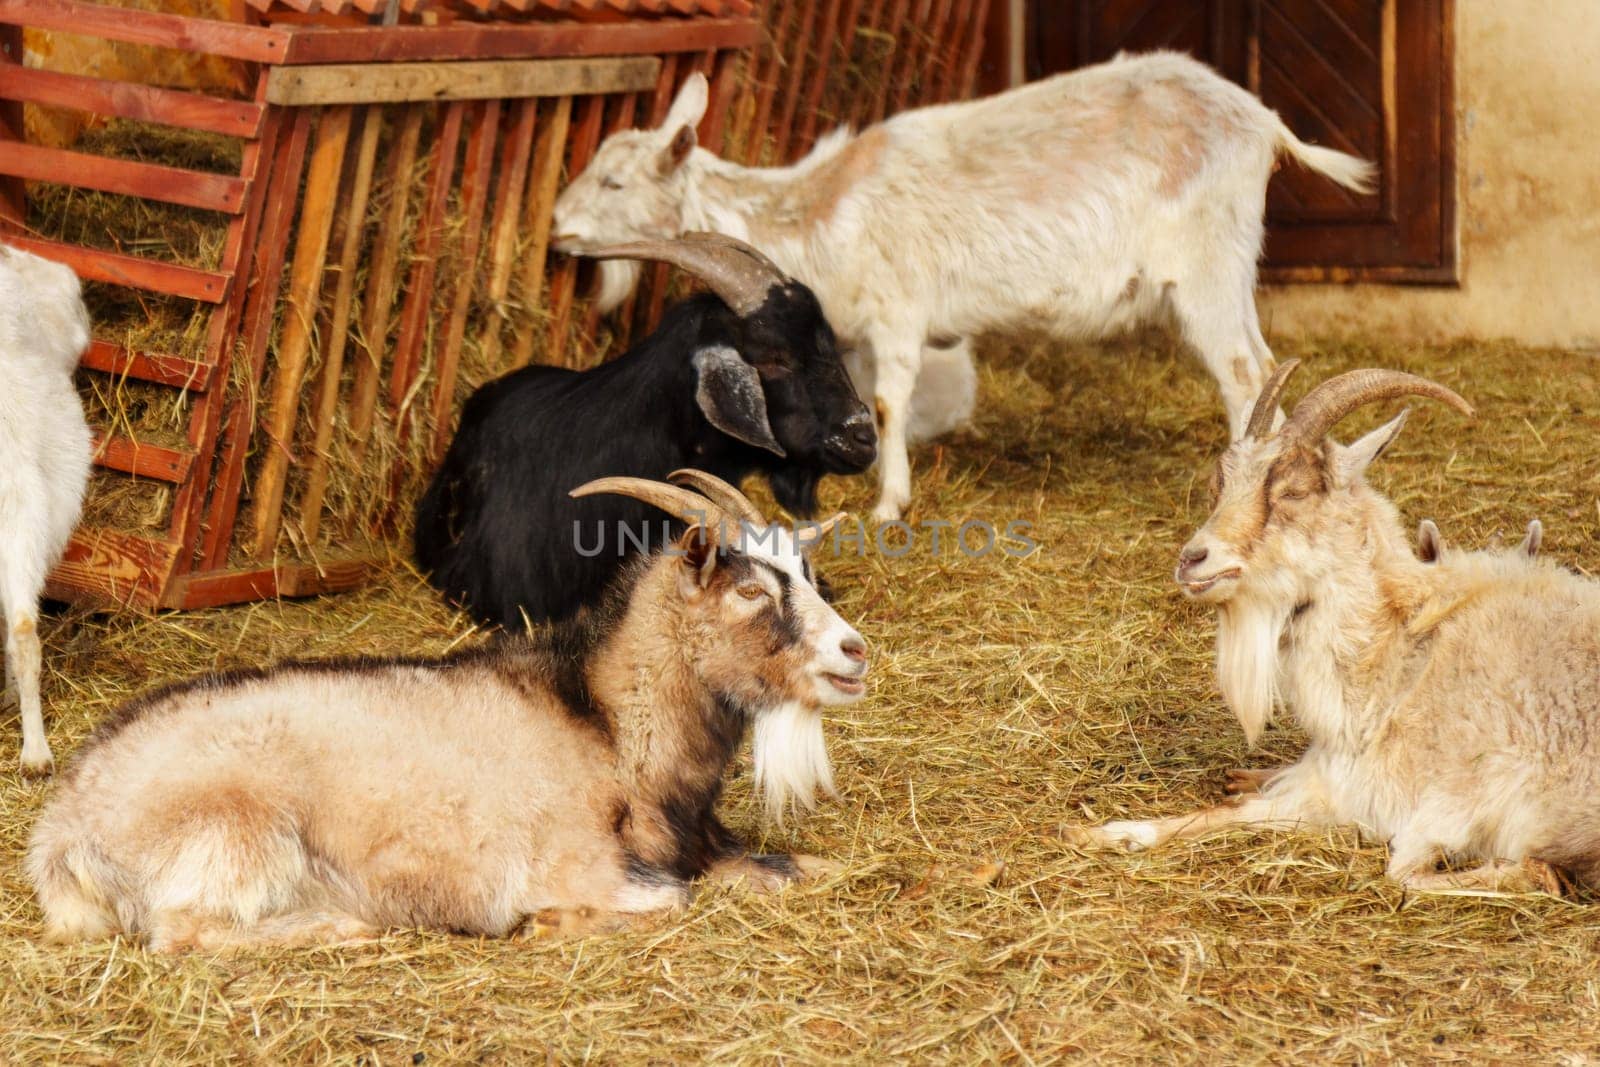 A group of serene white goats stand inside a pen, calmly grazing.